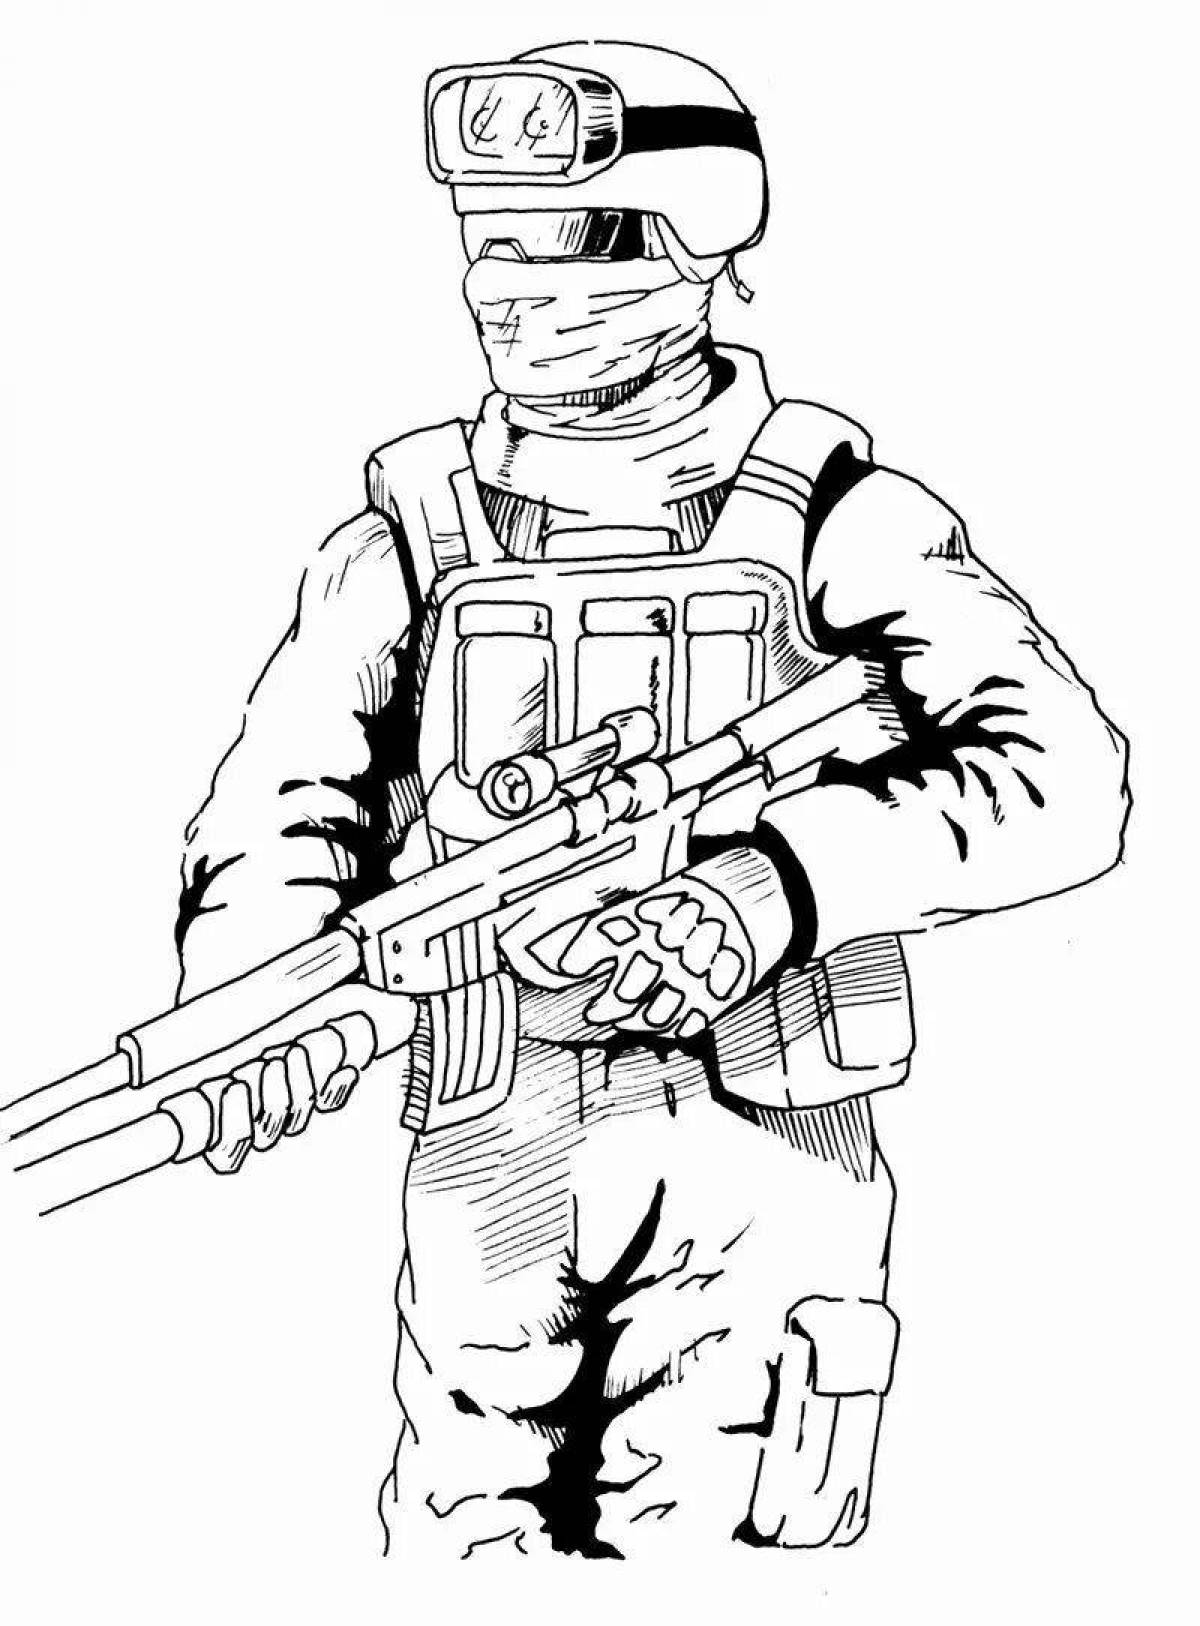 Bright standoff 2 logo coloring page